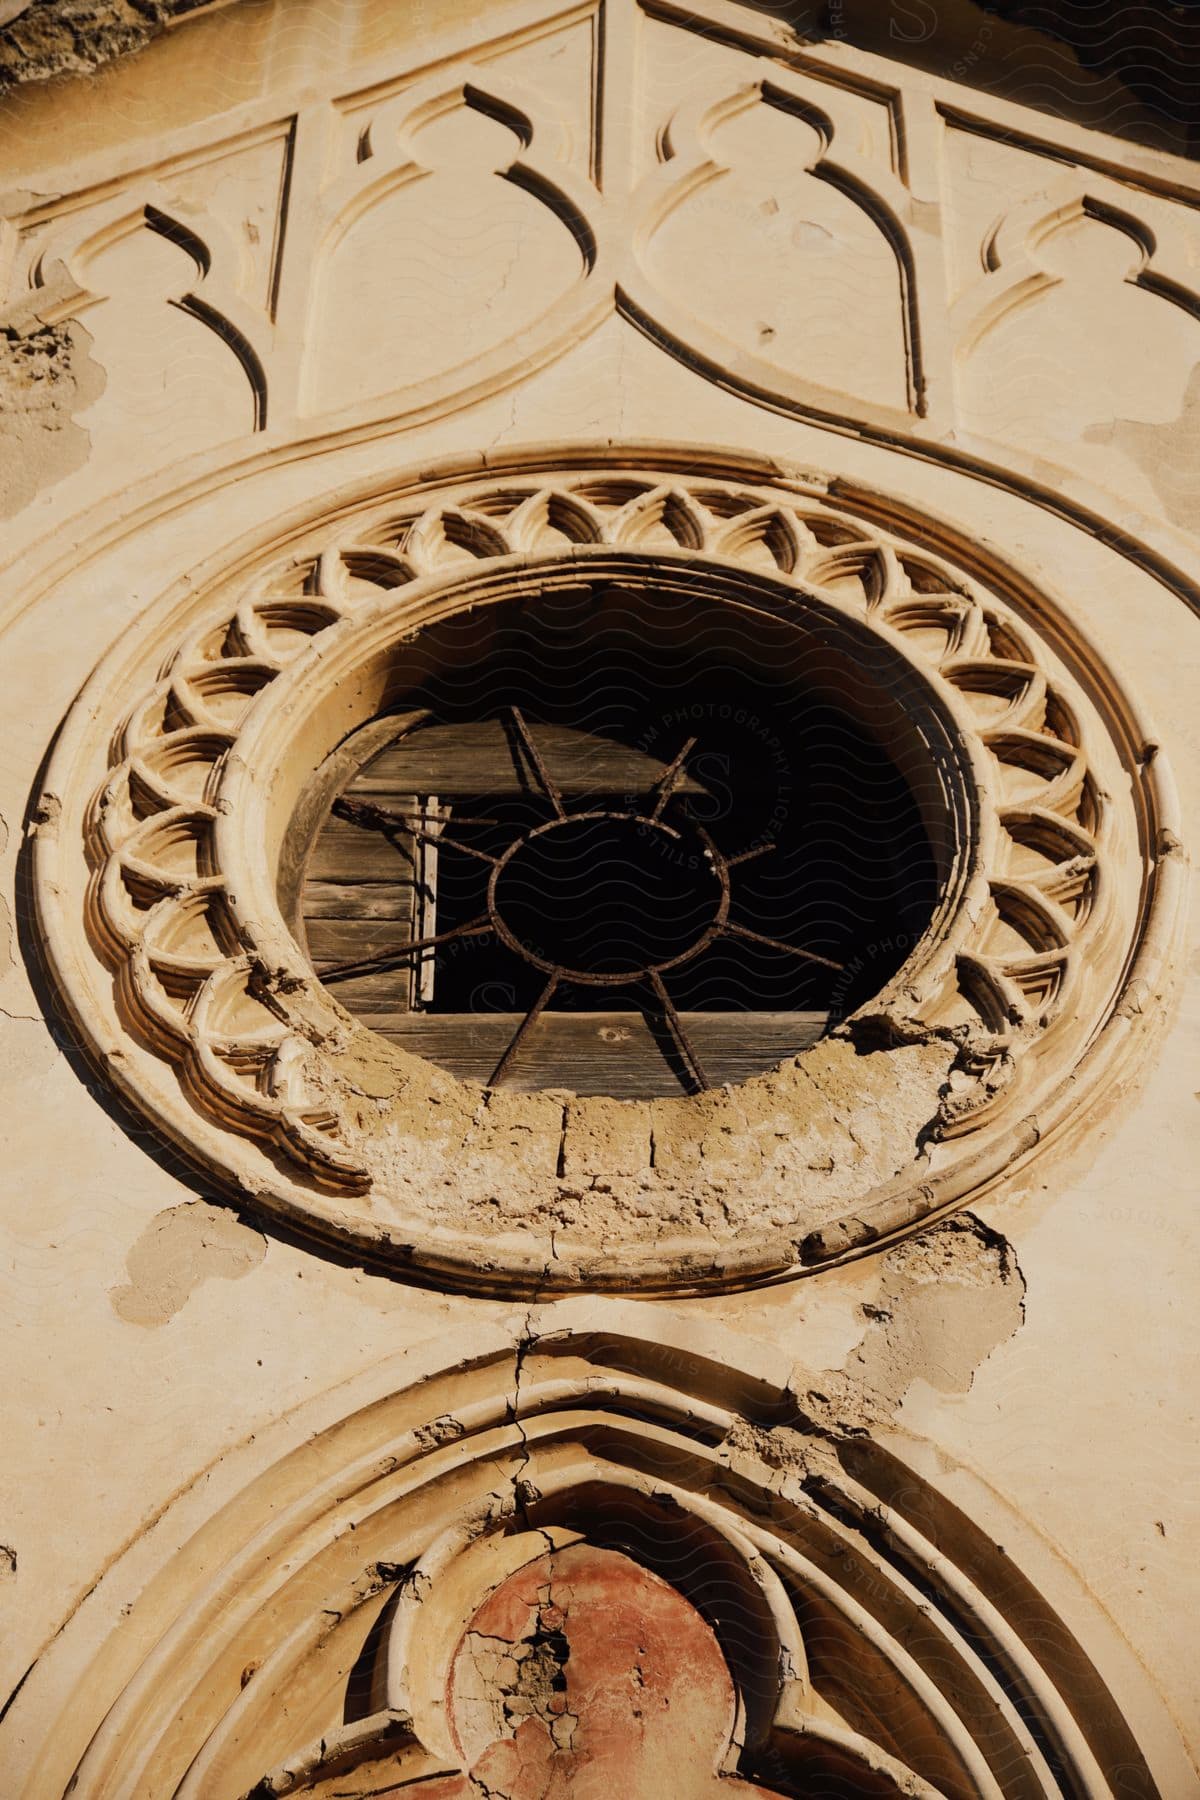 External architecture of the front window of the Church of San Giuda Taddeo.